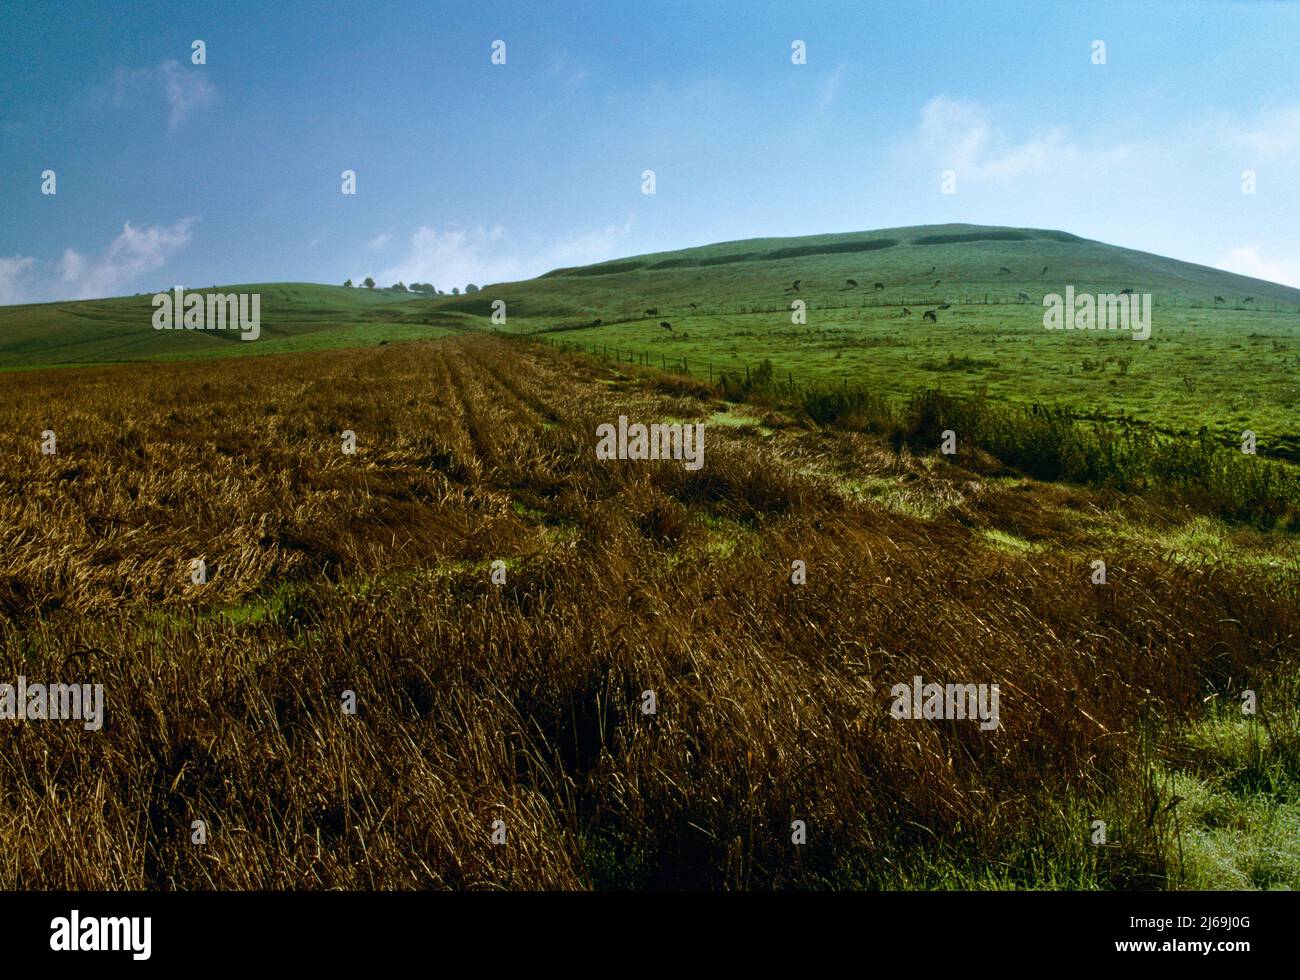 View E from Workway Drove of Knap Hill Neolithic causewayed enclosure on a rounded hill overlooking the Vale of Pewsey (to R), Wiltshire, England, UK. Stock Photo